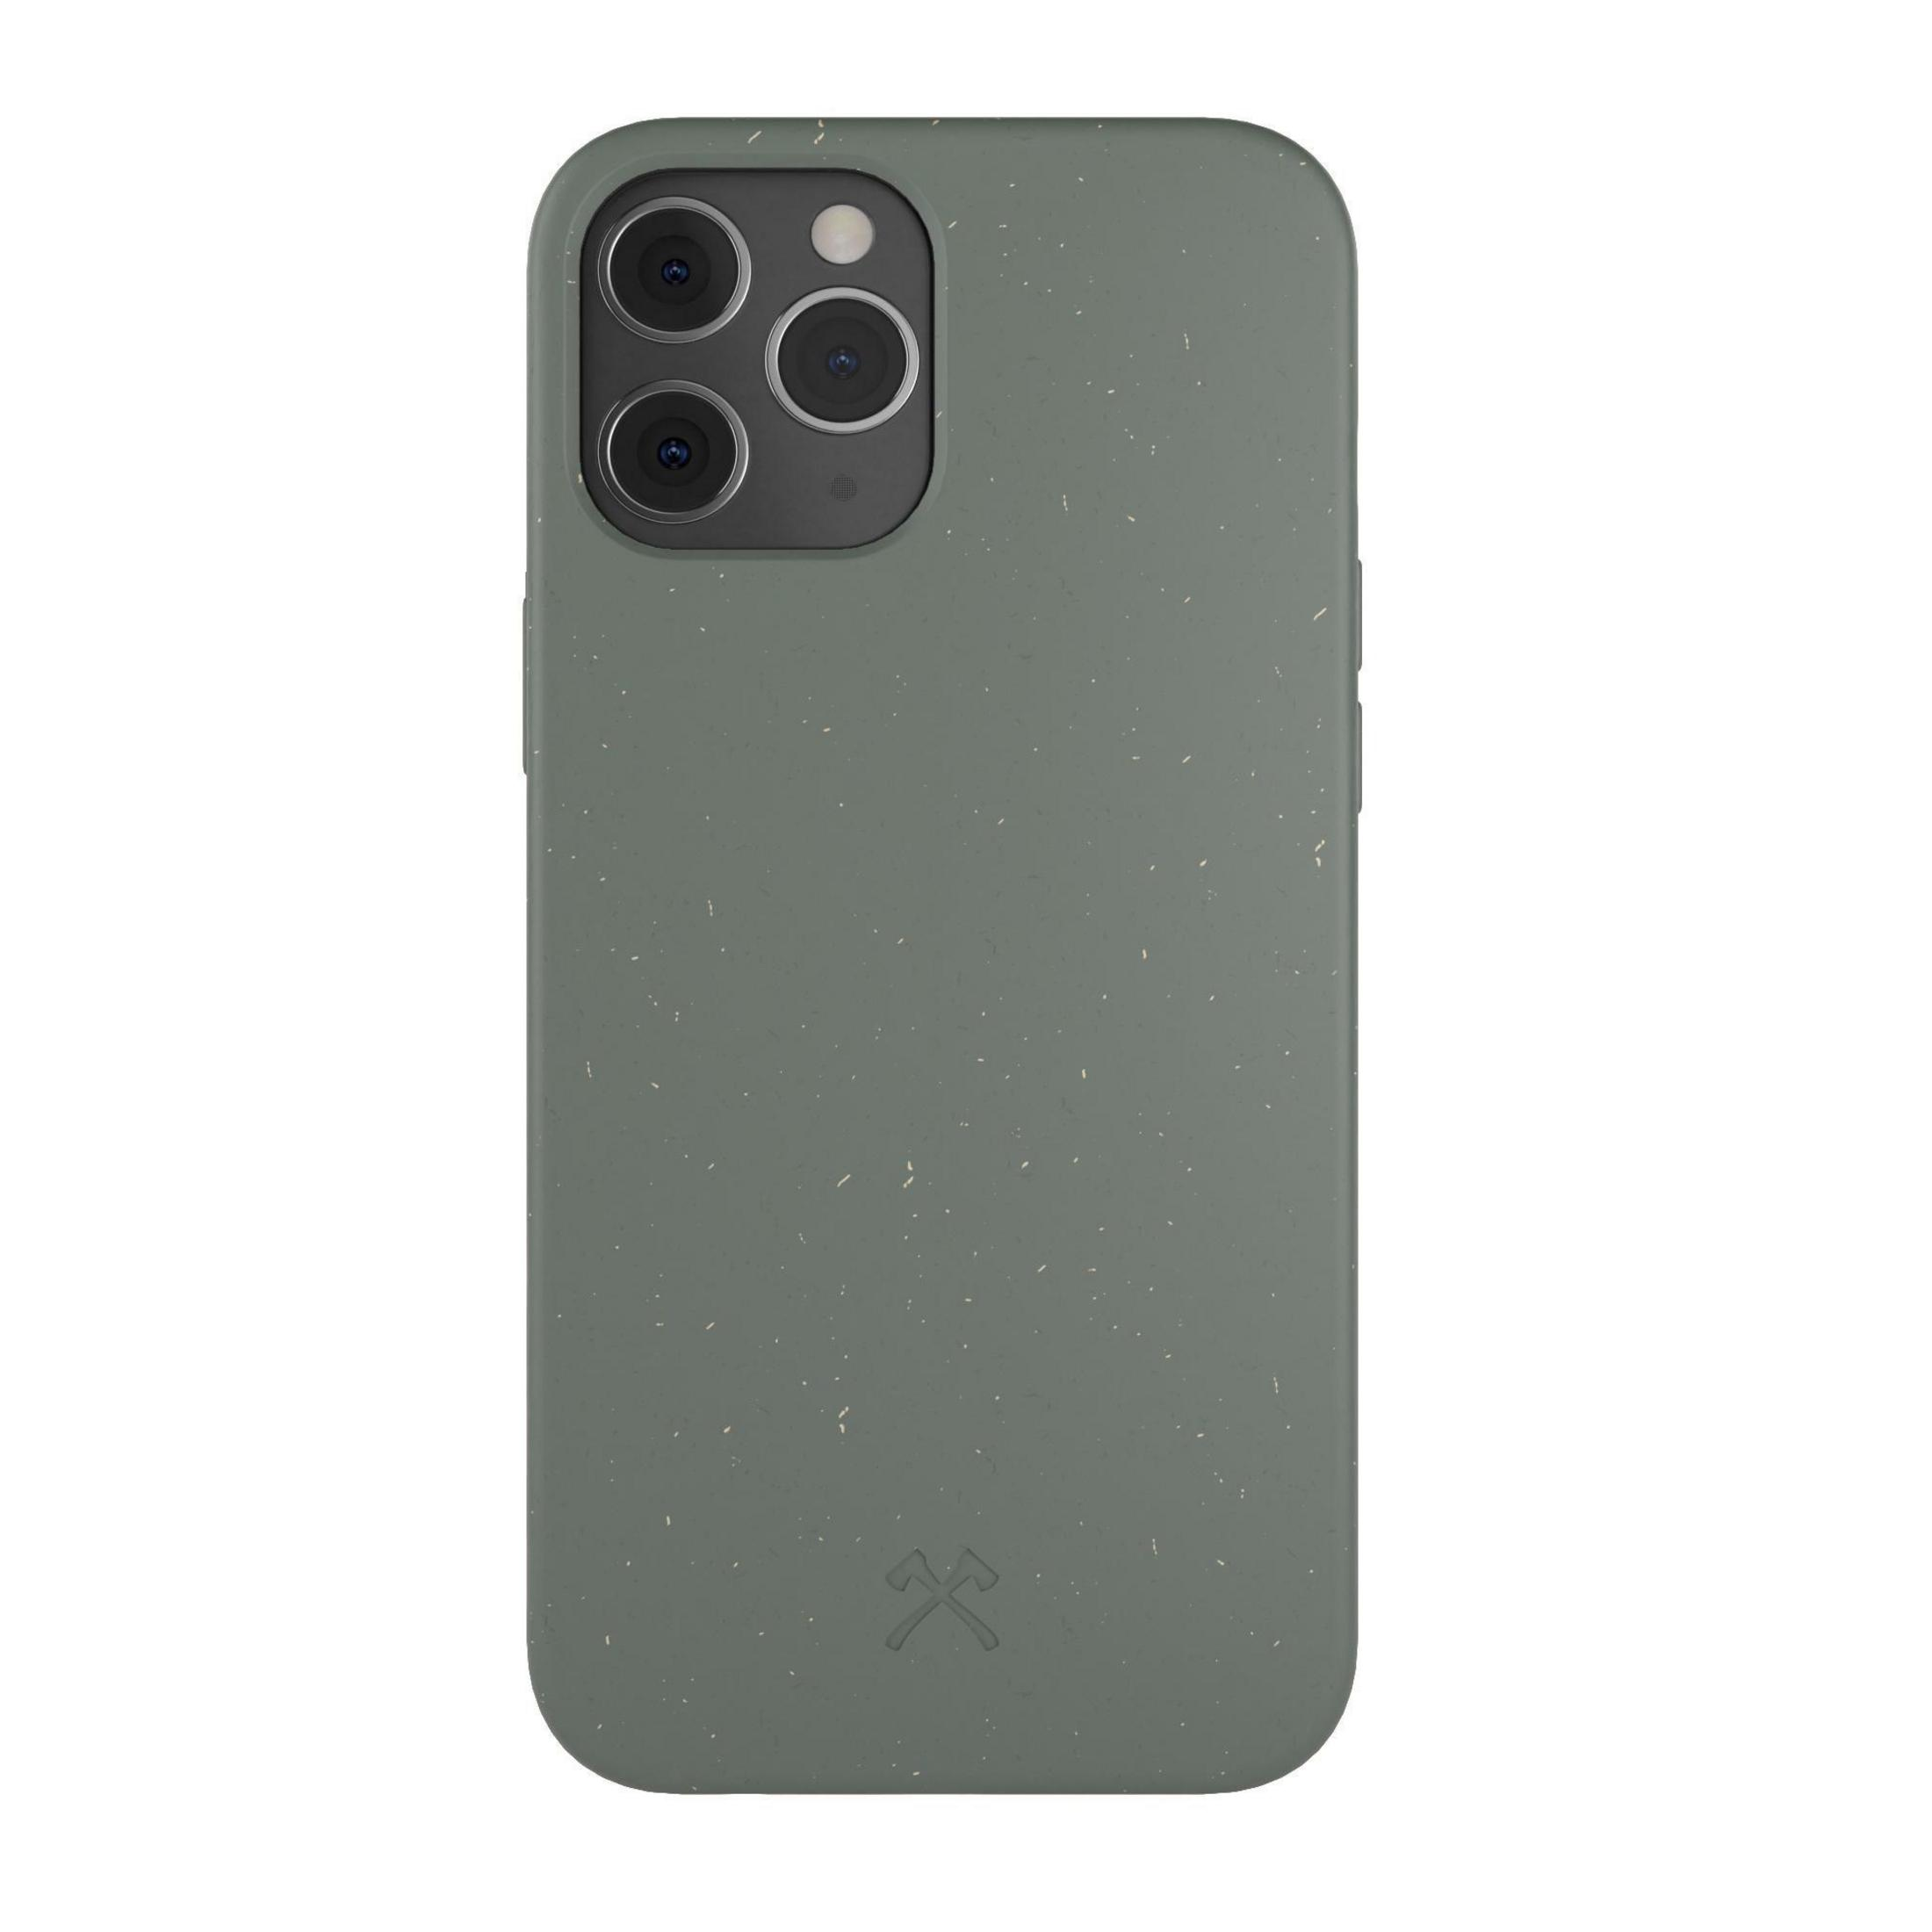 PRO 12 BIO Backcover, Pro, ECO478 WOODCESSORIES 12 GREEN, 12, Grün CLASSIC CASE iPhone 12 iPhone Apple, IP